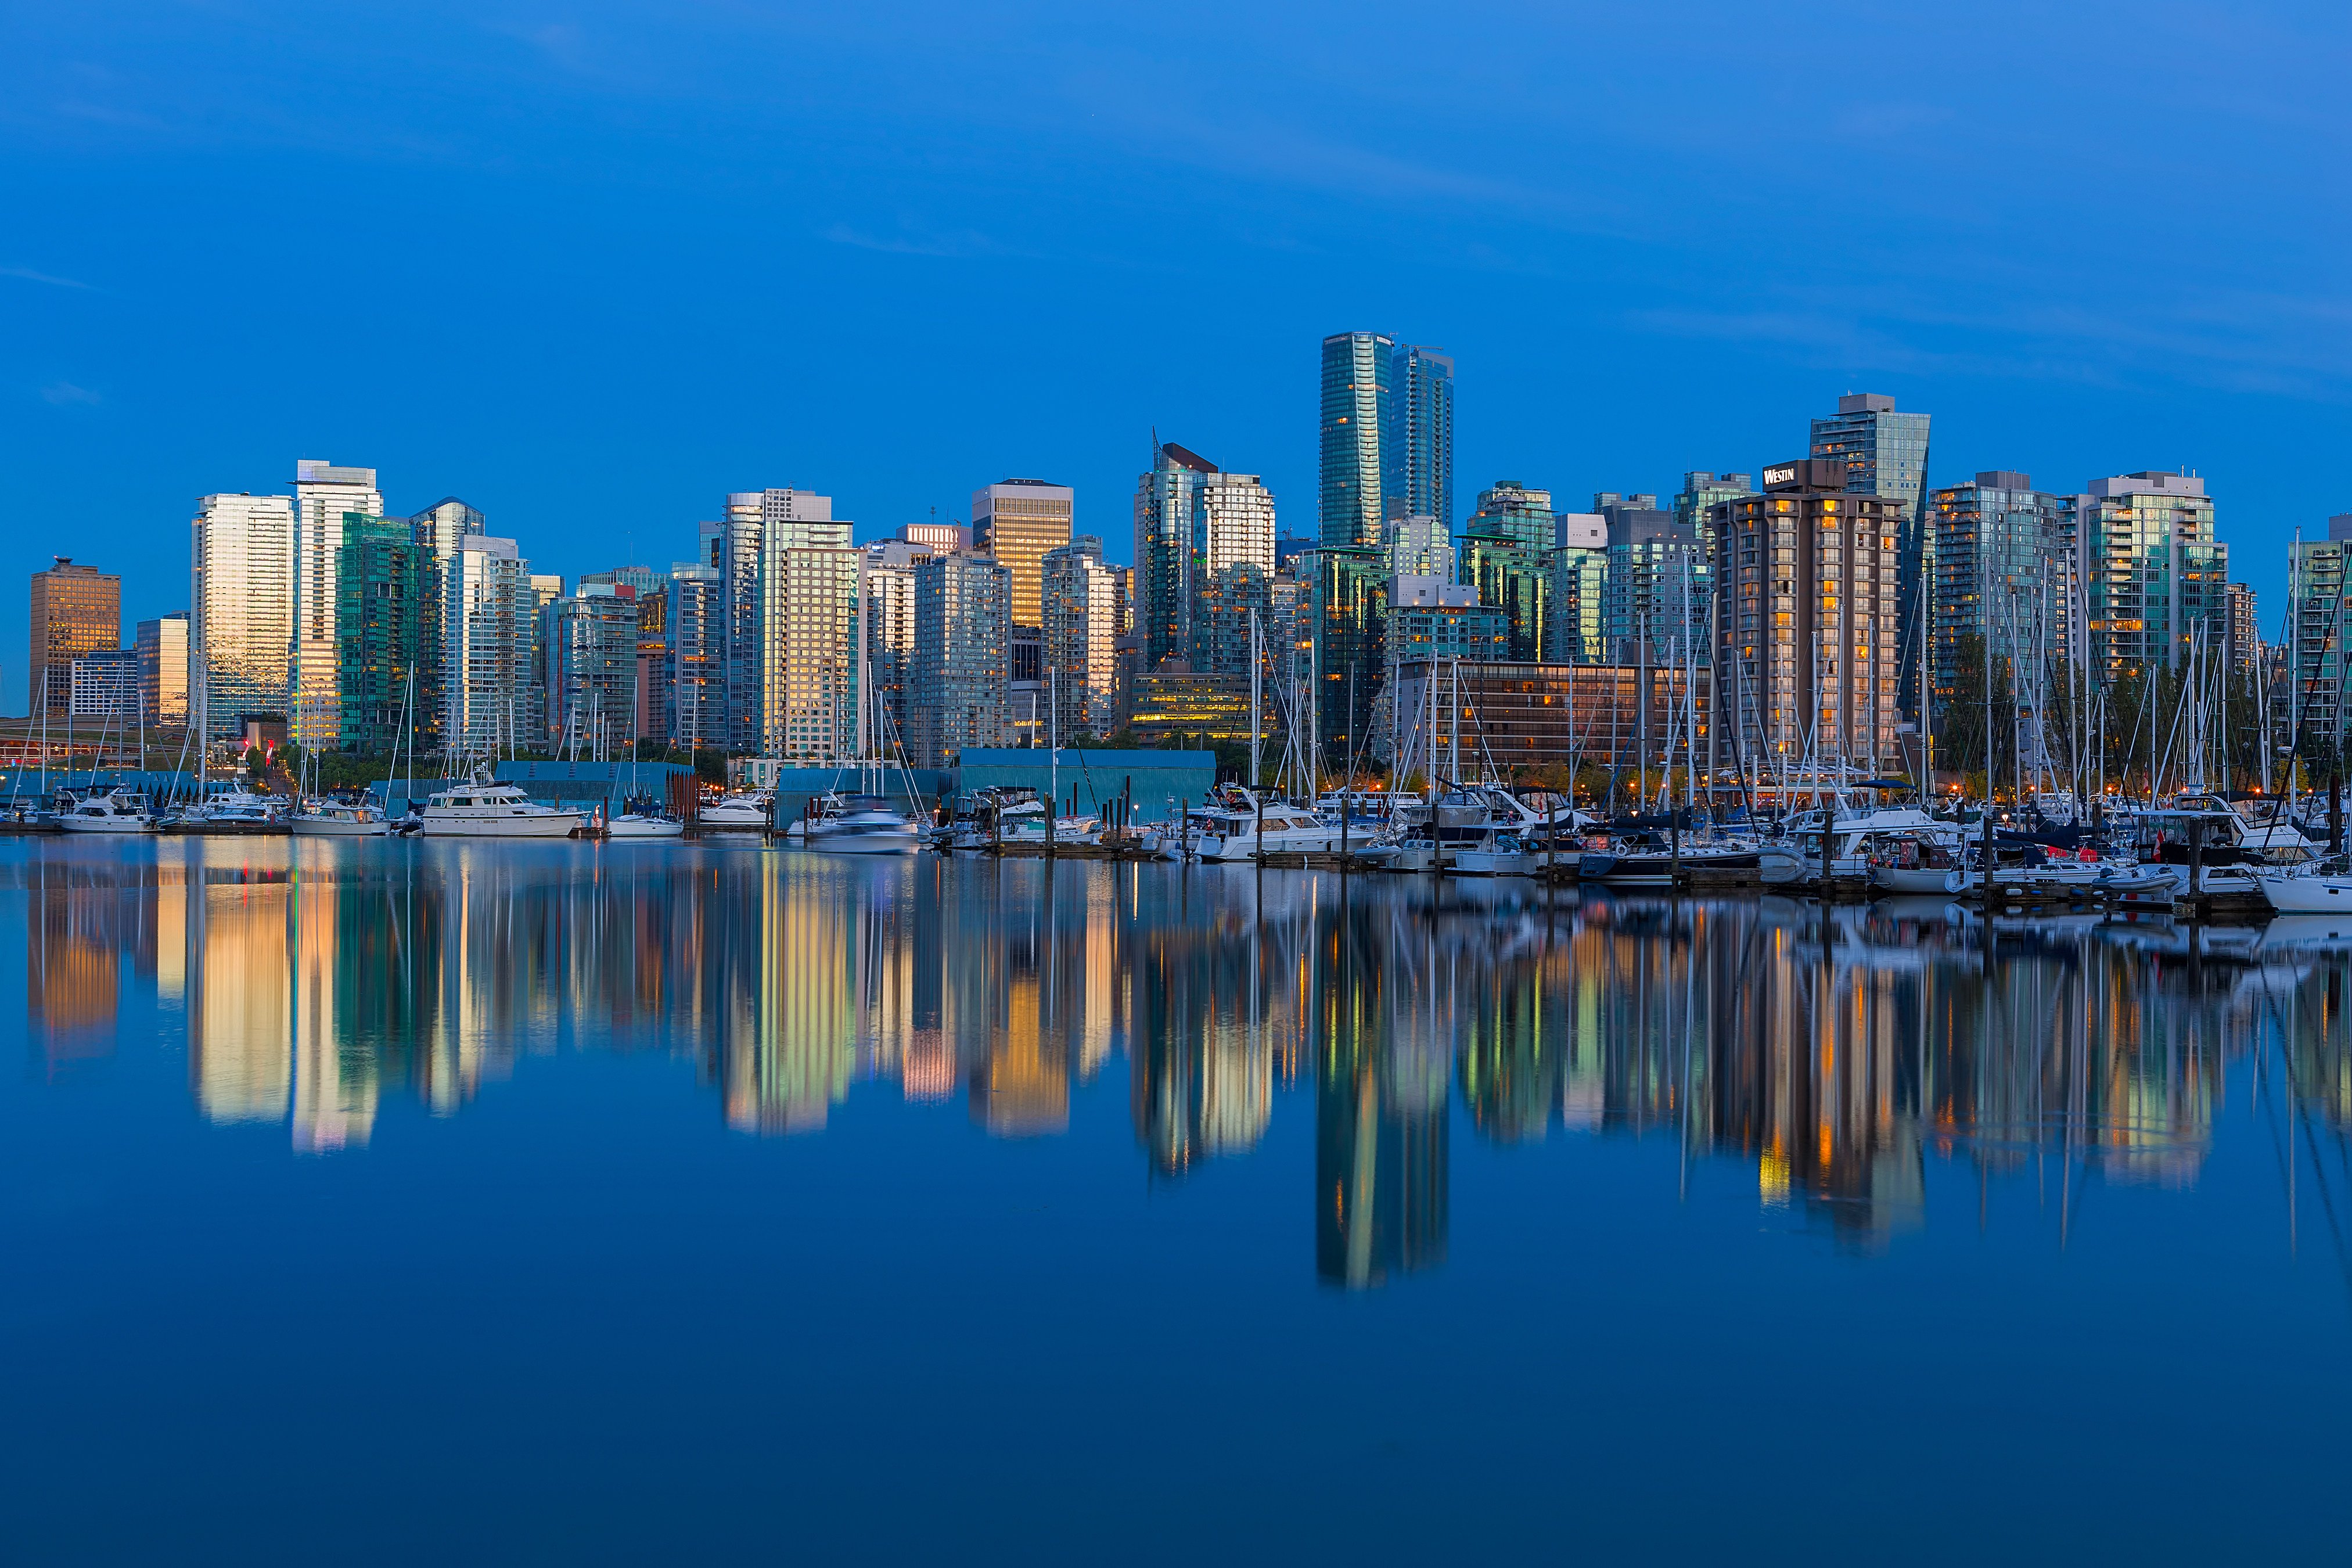 Vancouver, British Columbia’s skyline and reflection by the marina. The city has seen a bump in Hongers immigrating there, reversing recent trends. Photo: Shutterstock